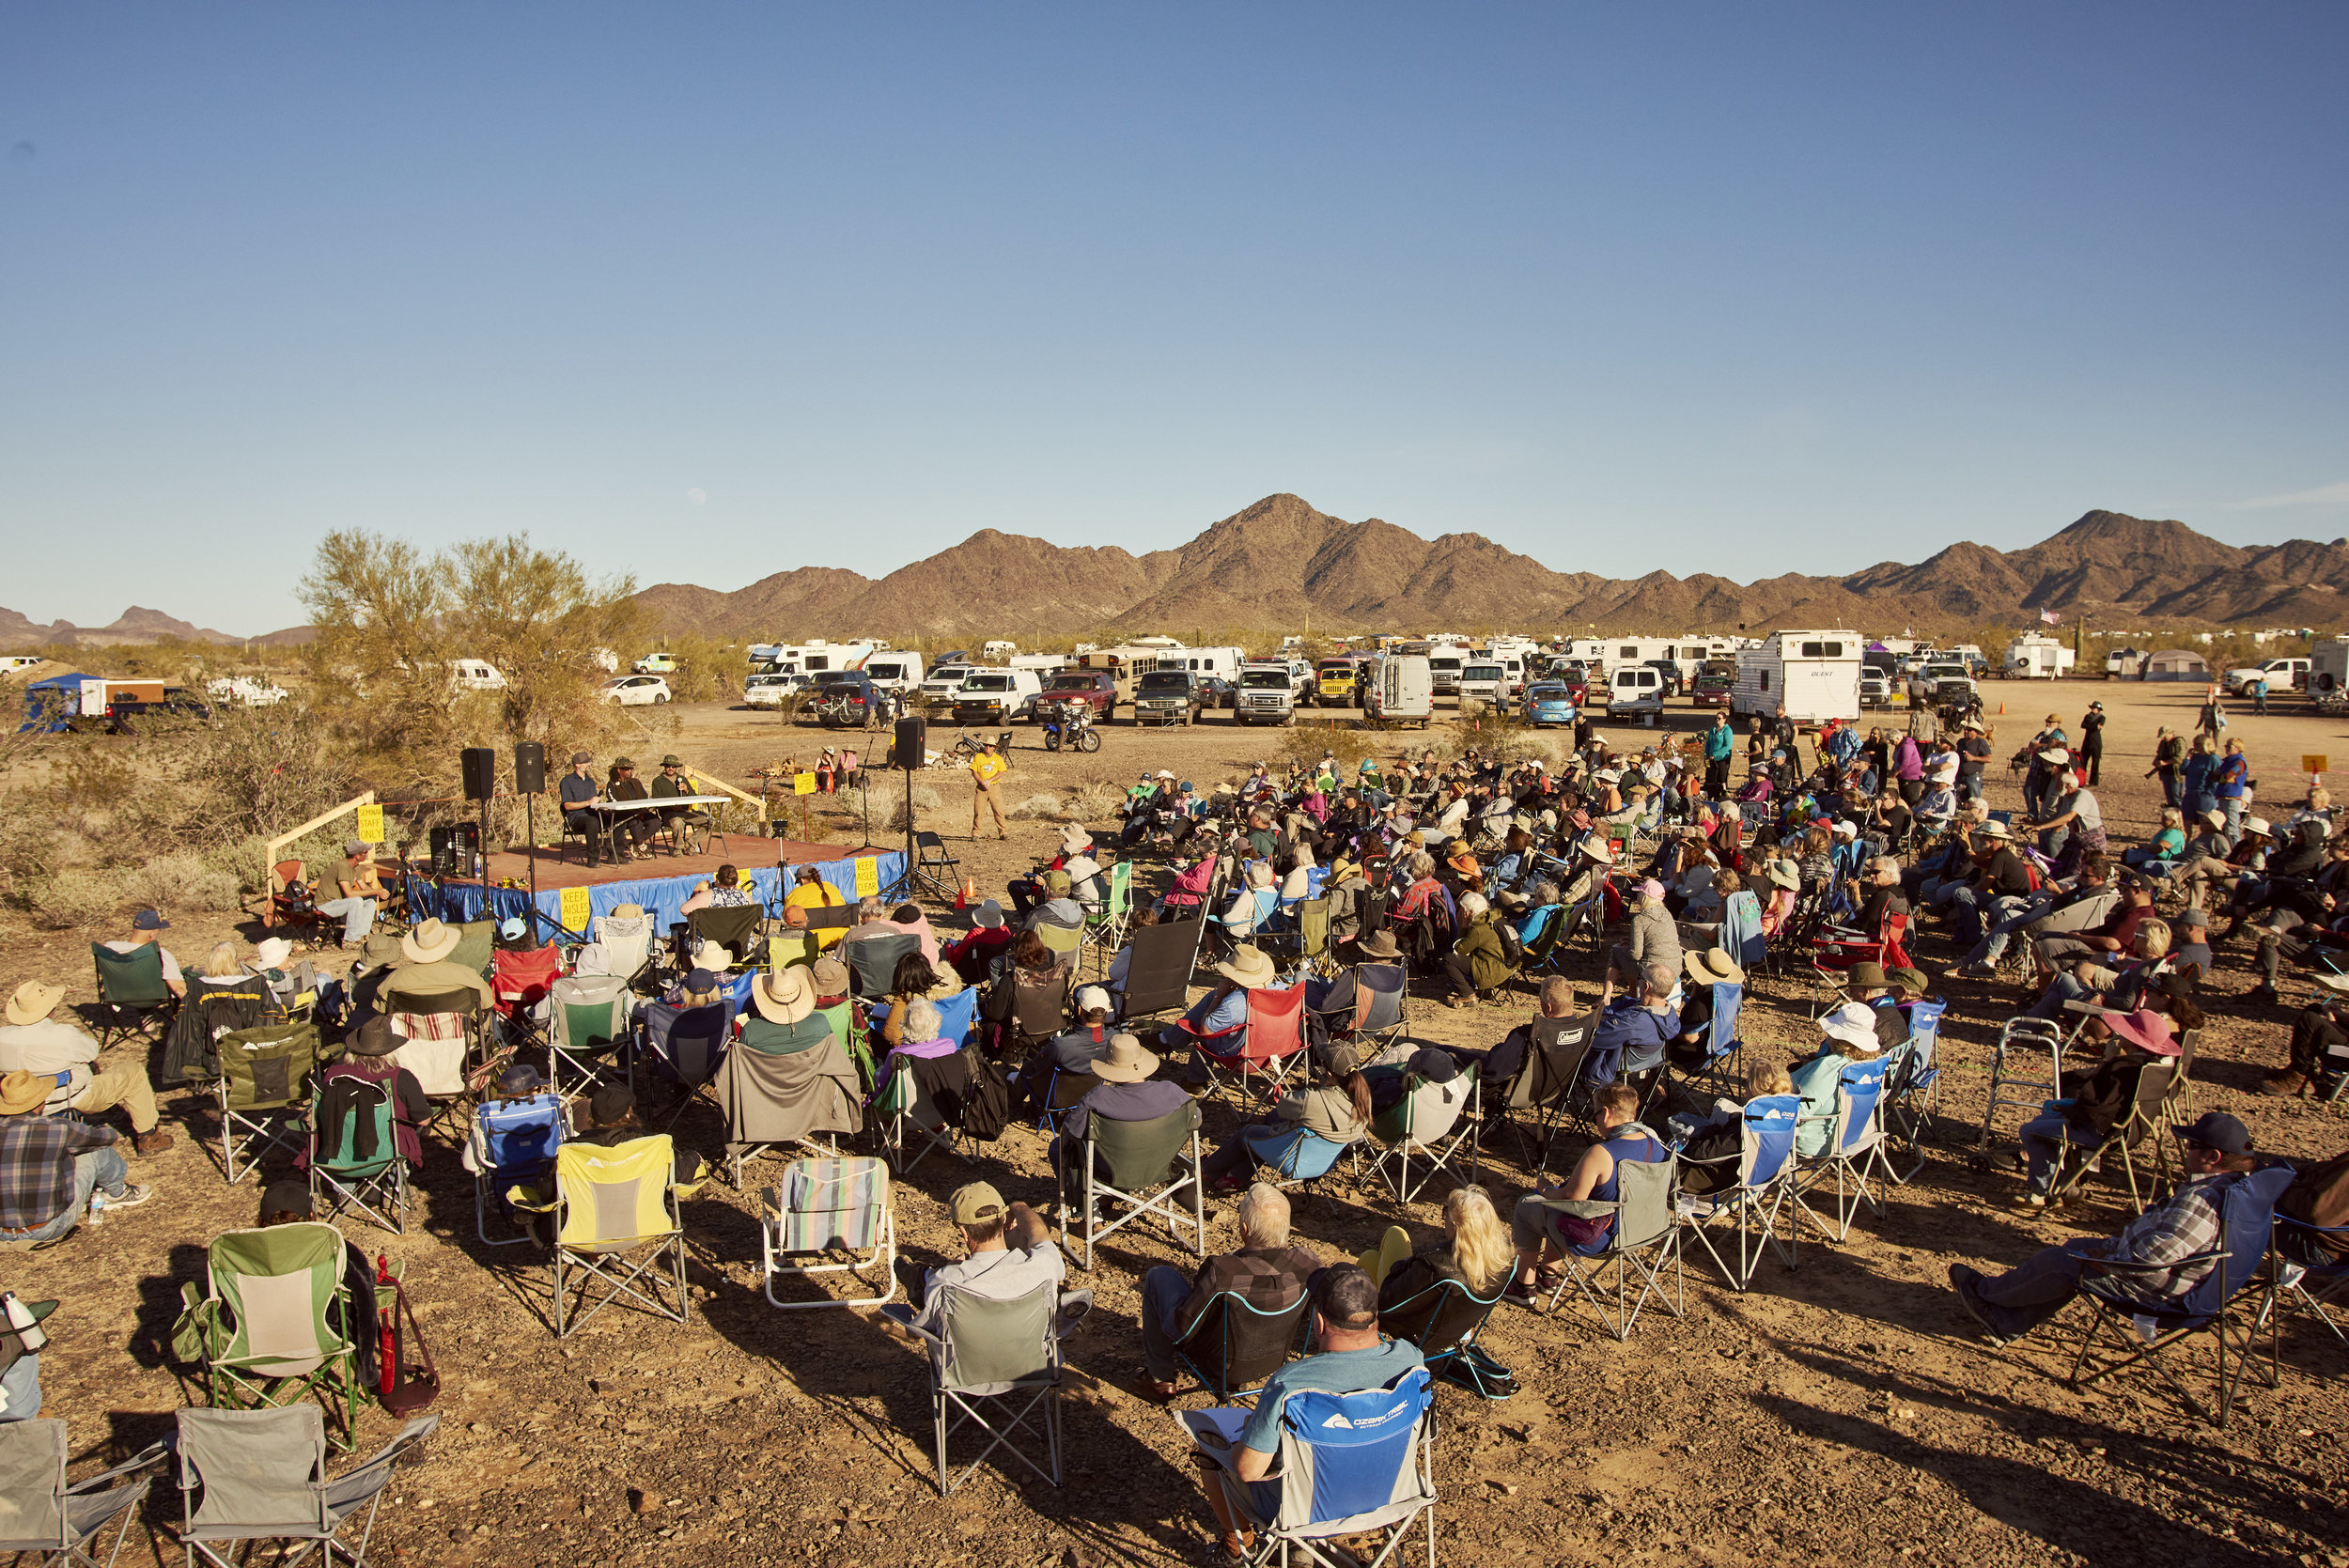  Feature for LeMonde Magazine FR about “Snowbirds” in Arizona. Quartzsite Arizona usually has an official population of around 3,000, but in January, the city can accommodate more than 150,000 people and between October and March, it sees nearly a mi